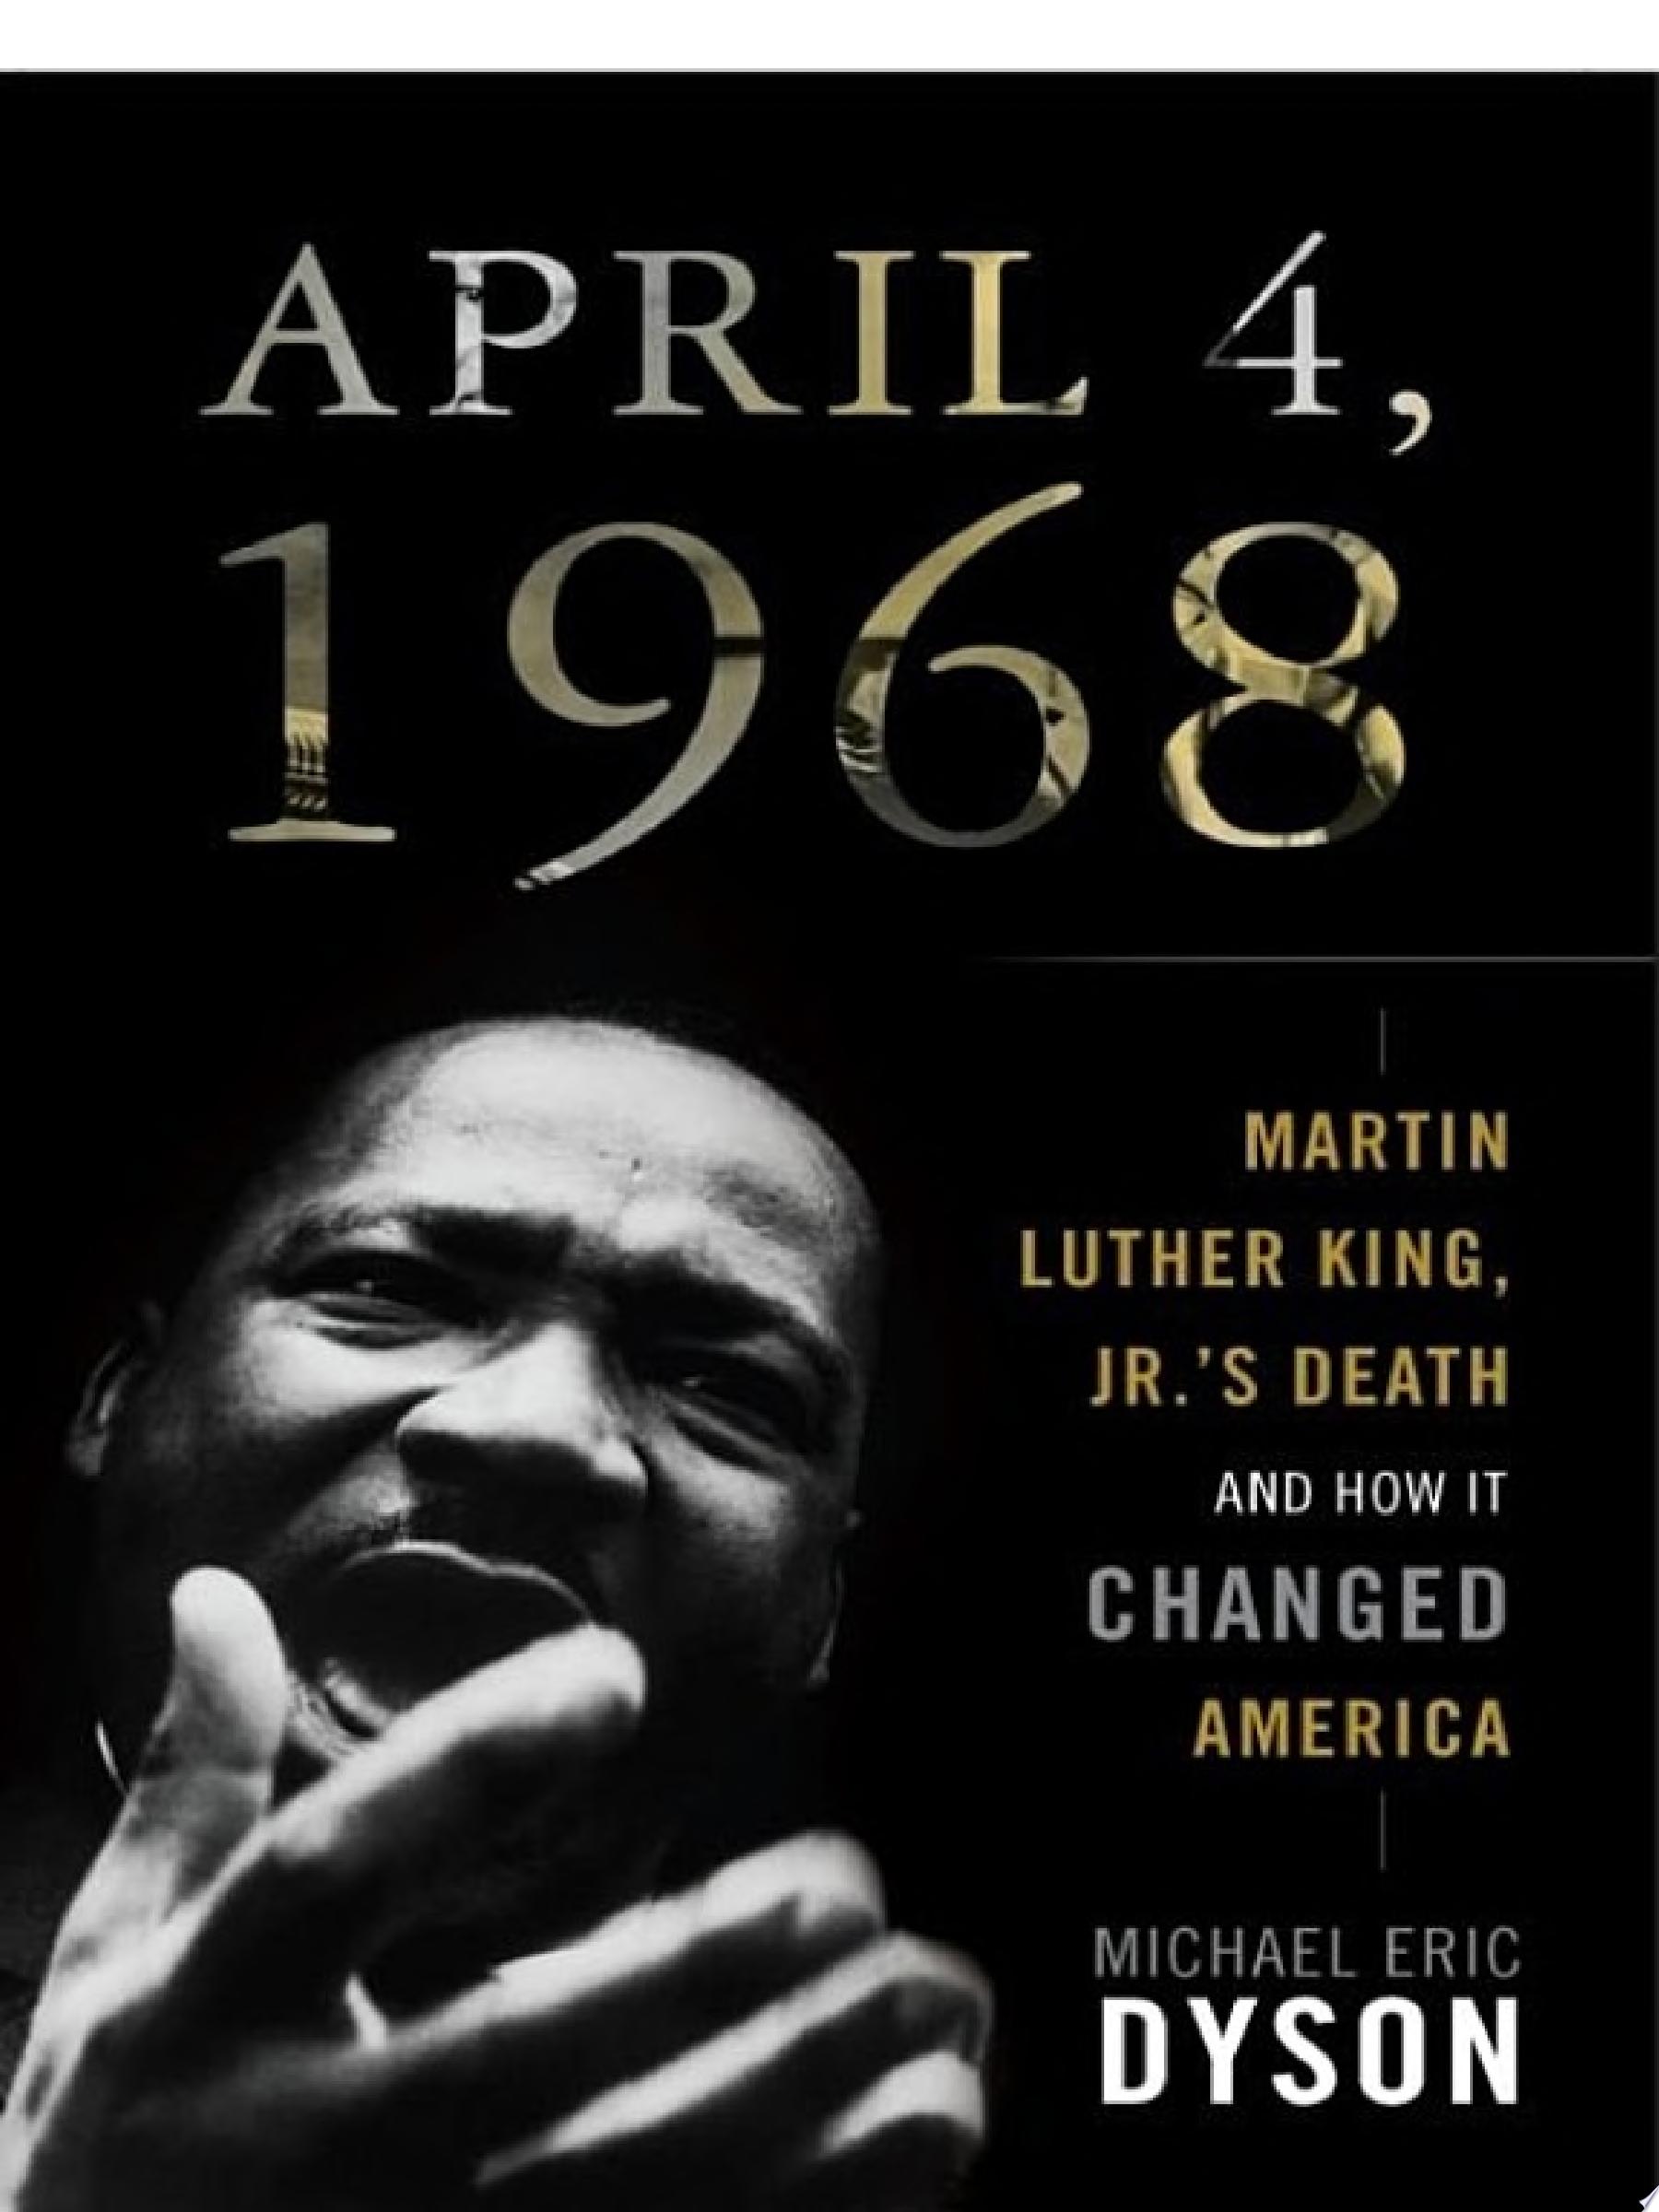 Image for "April 4, 1968"